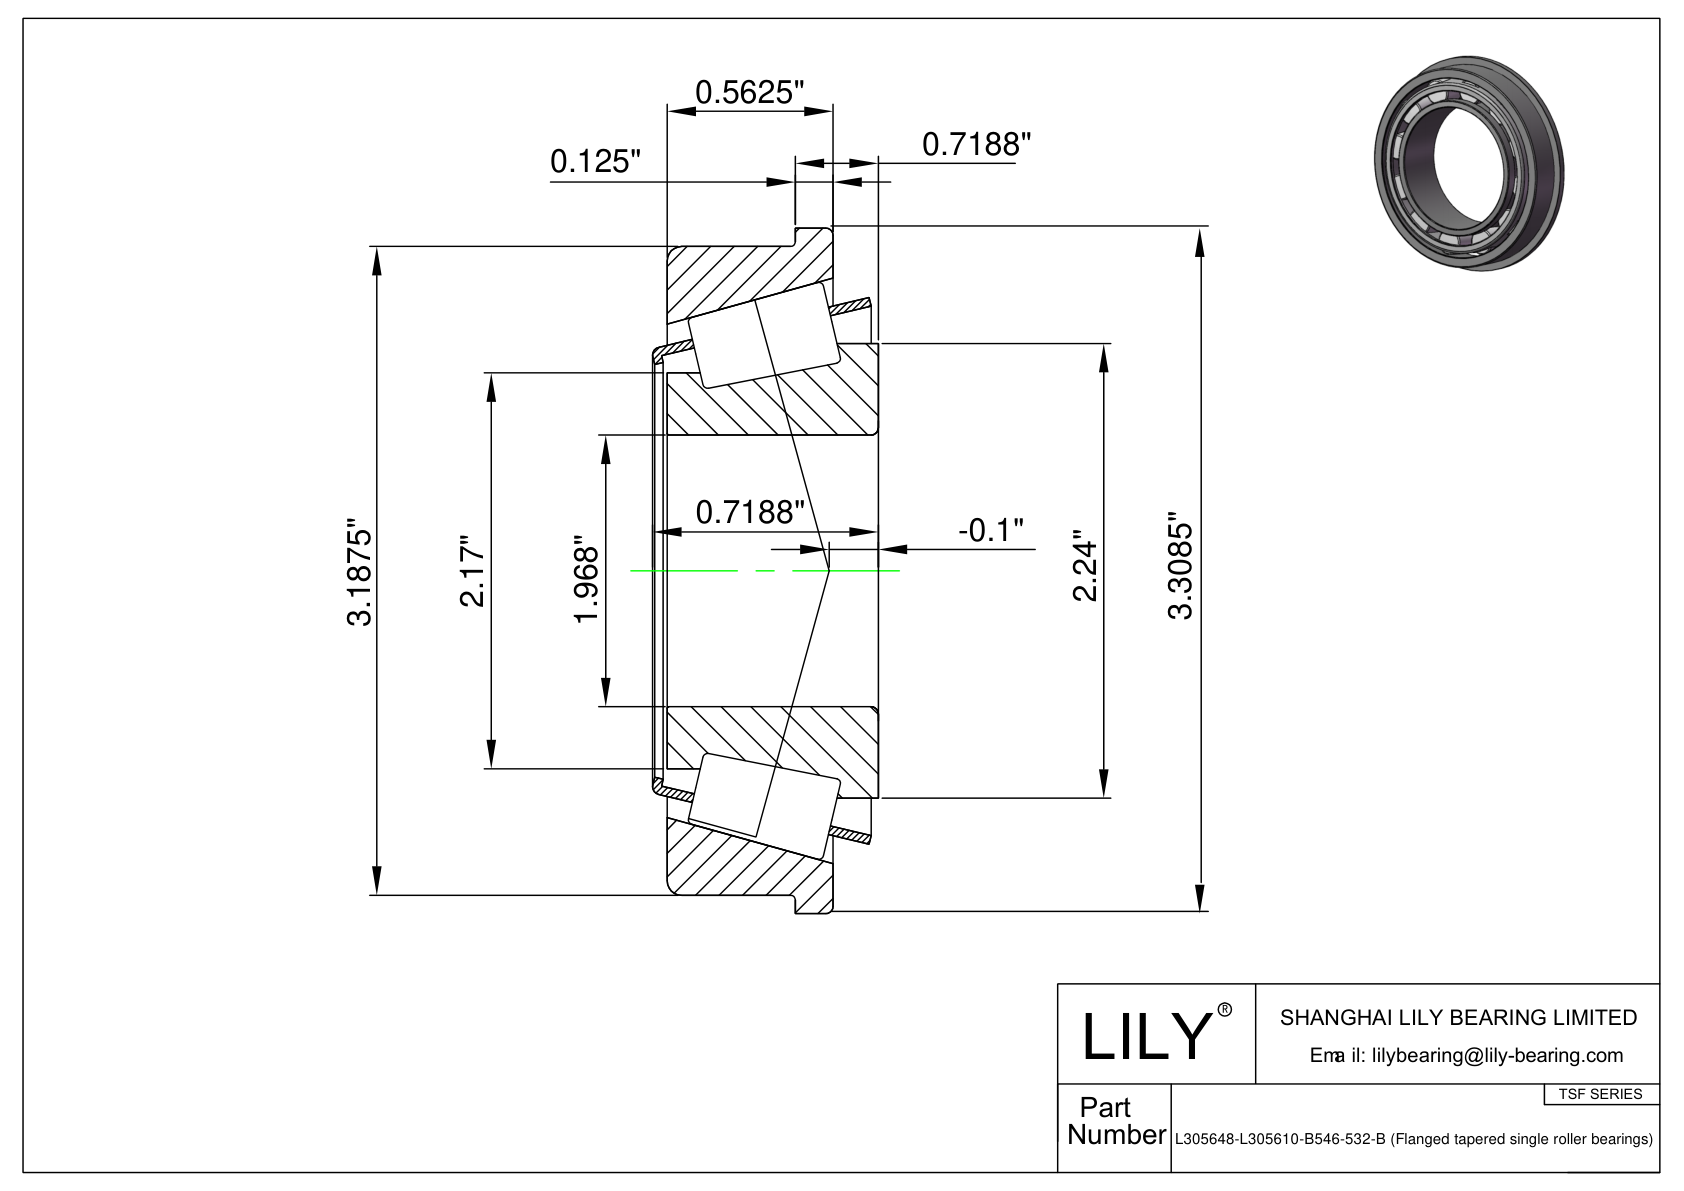 L305648-L305610-B TSF (Tapered Single Roller Bearings with Flange) (Imperial) cad drawing